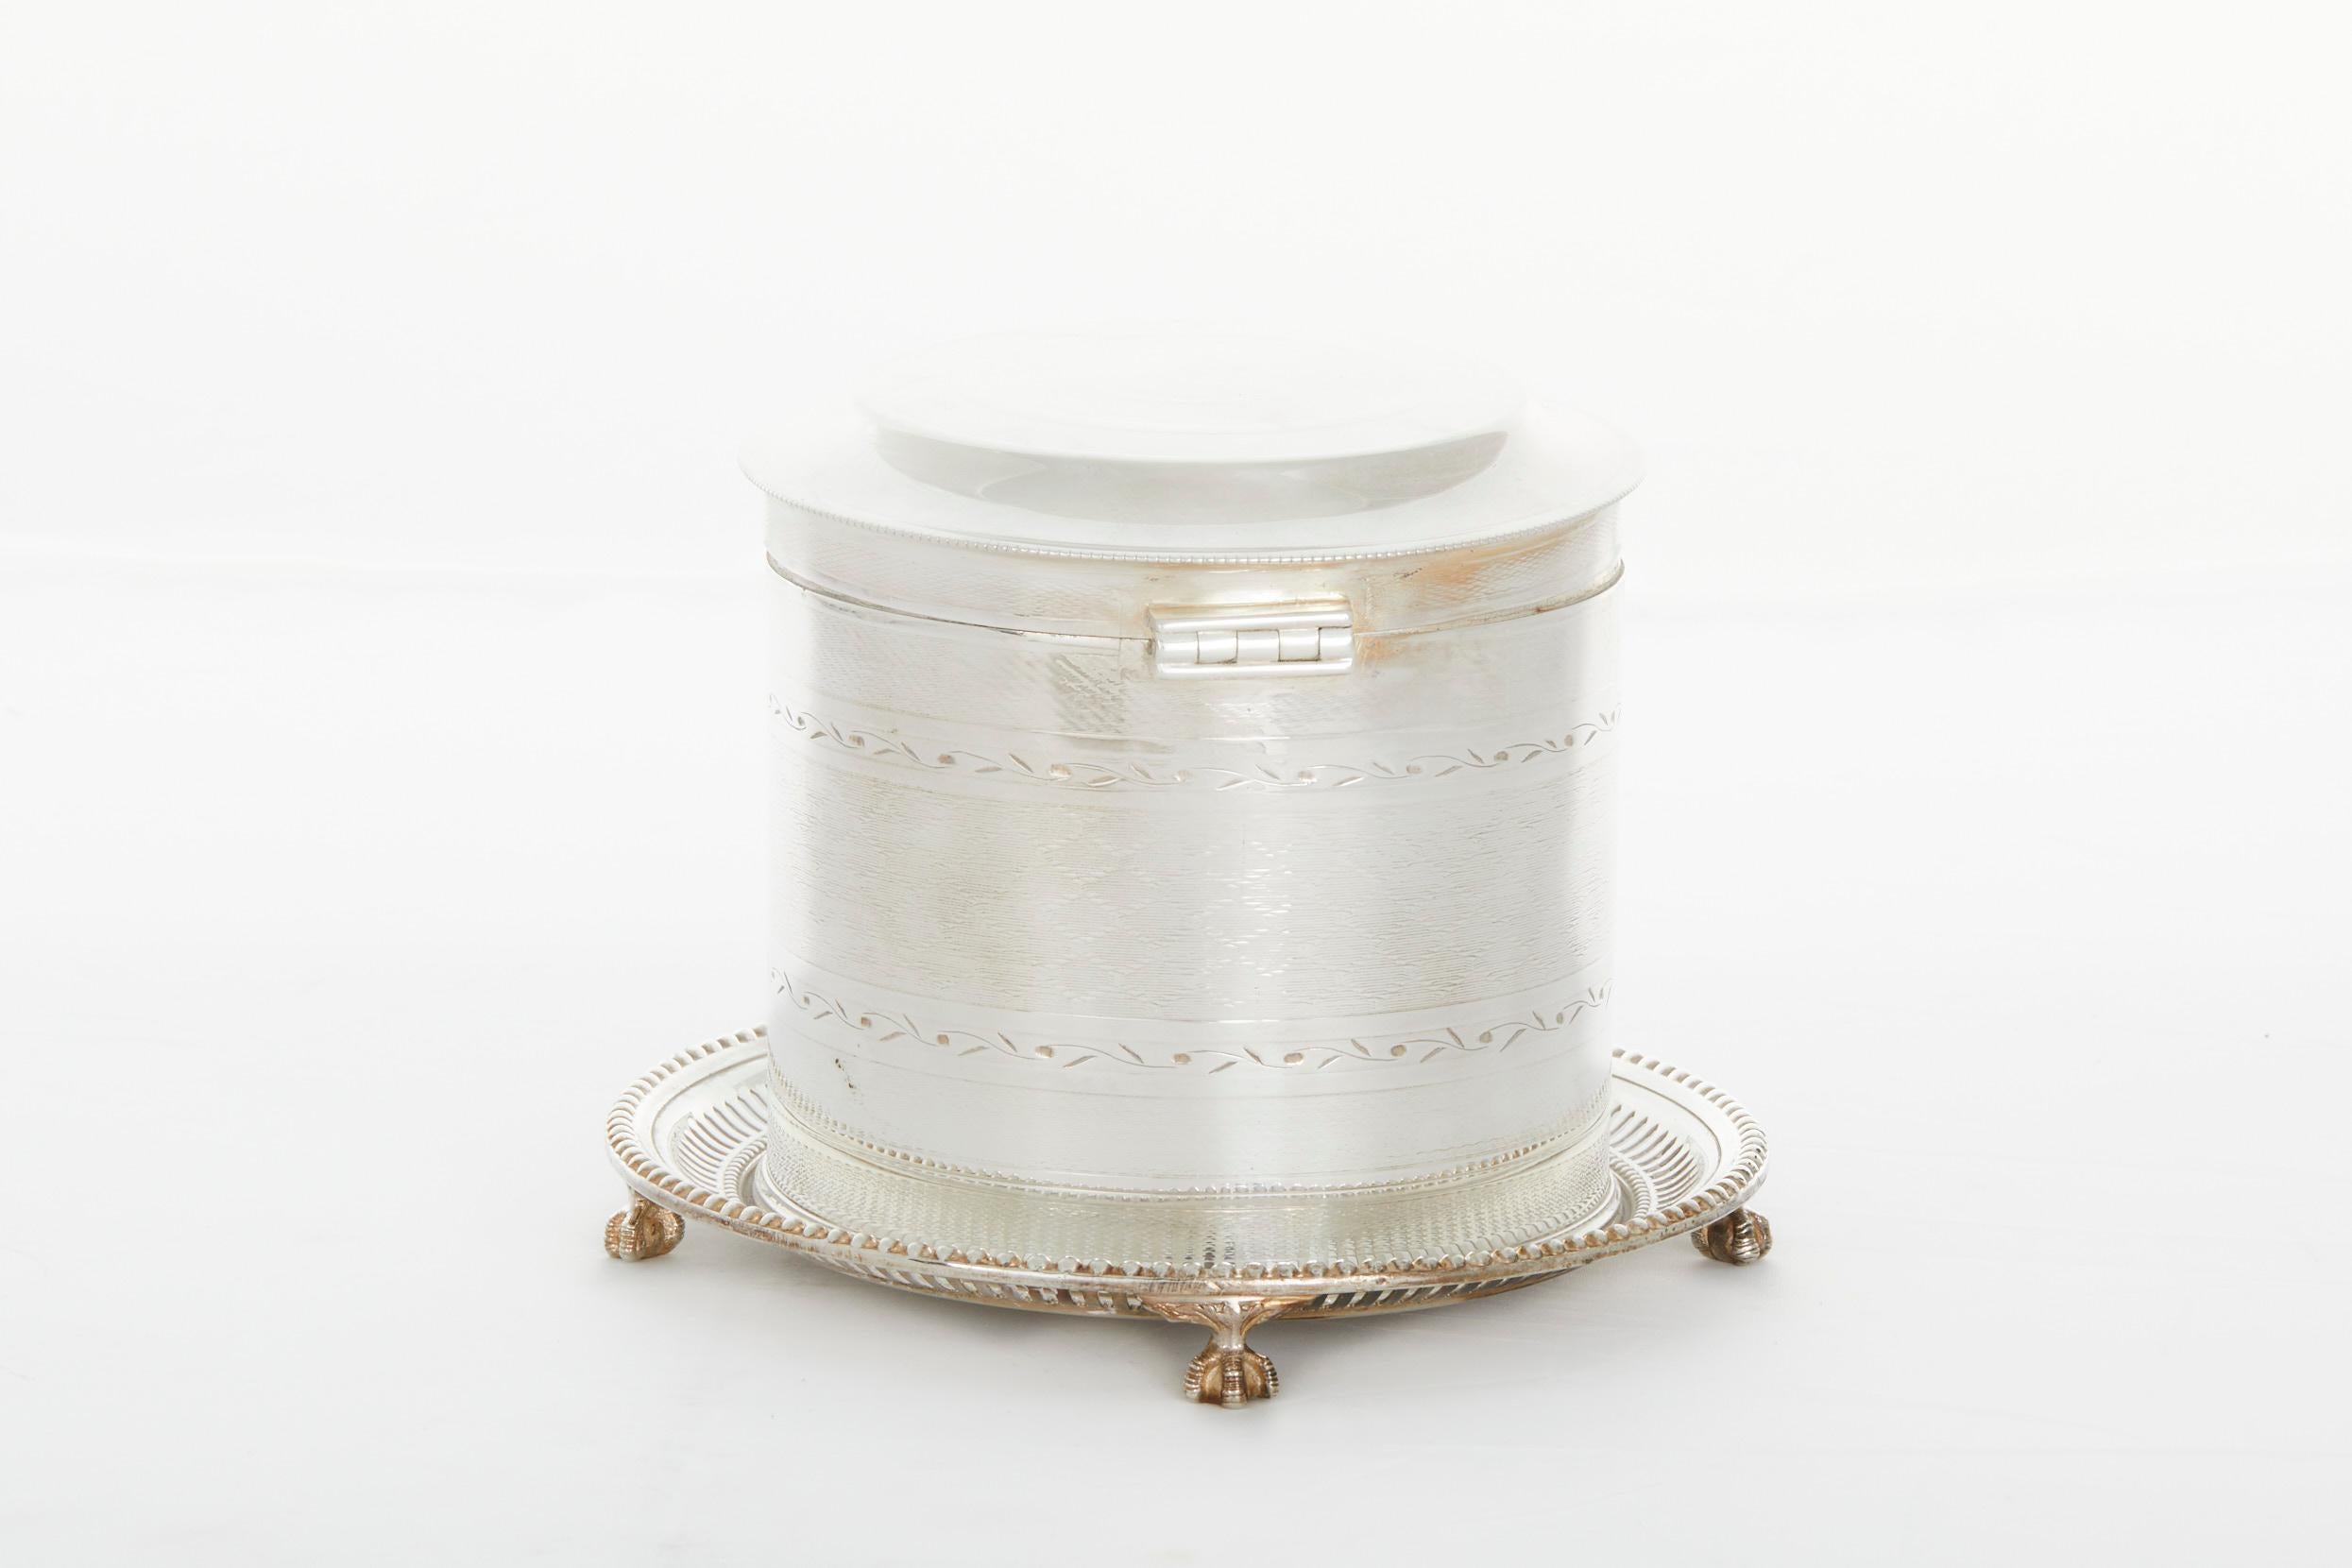 19th century English sheffield silver plate footed tea caddy / thin biscuit with exterior design details and attached covered top. The tea caddy is in good condition. Minor wear consistent with age / use. Maker's mark undersigned. The caddy stands